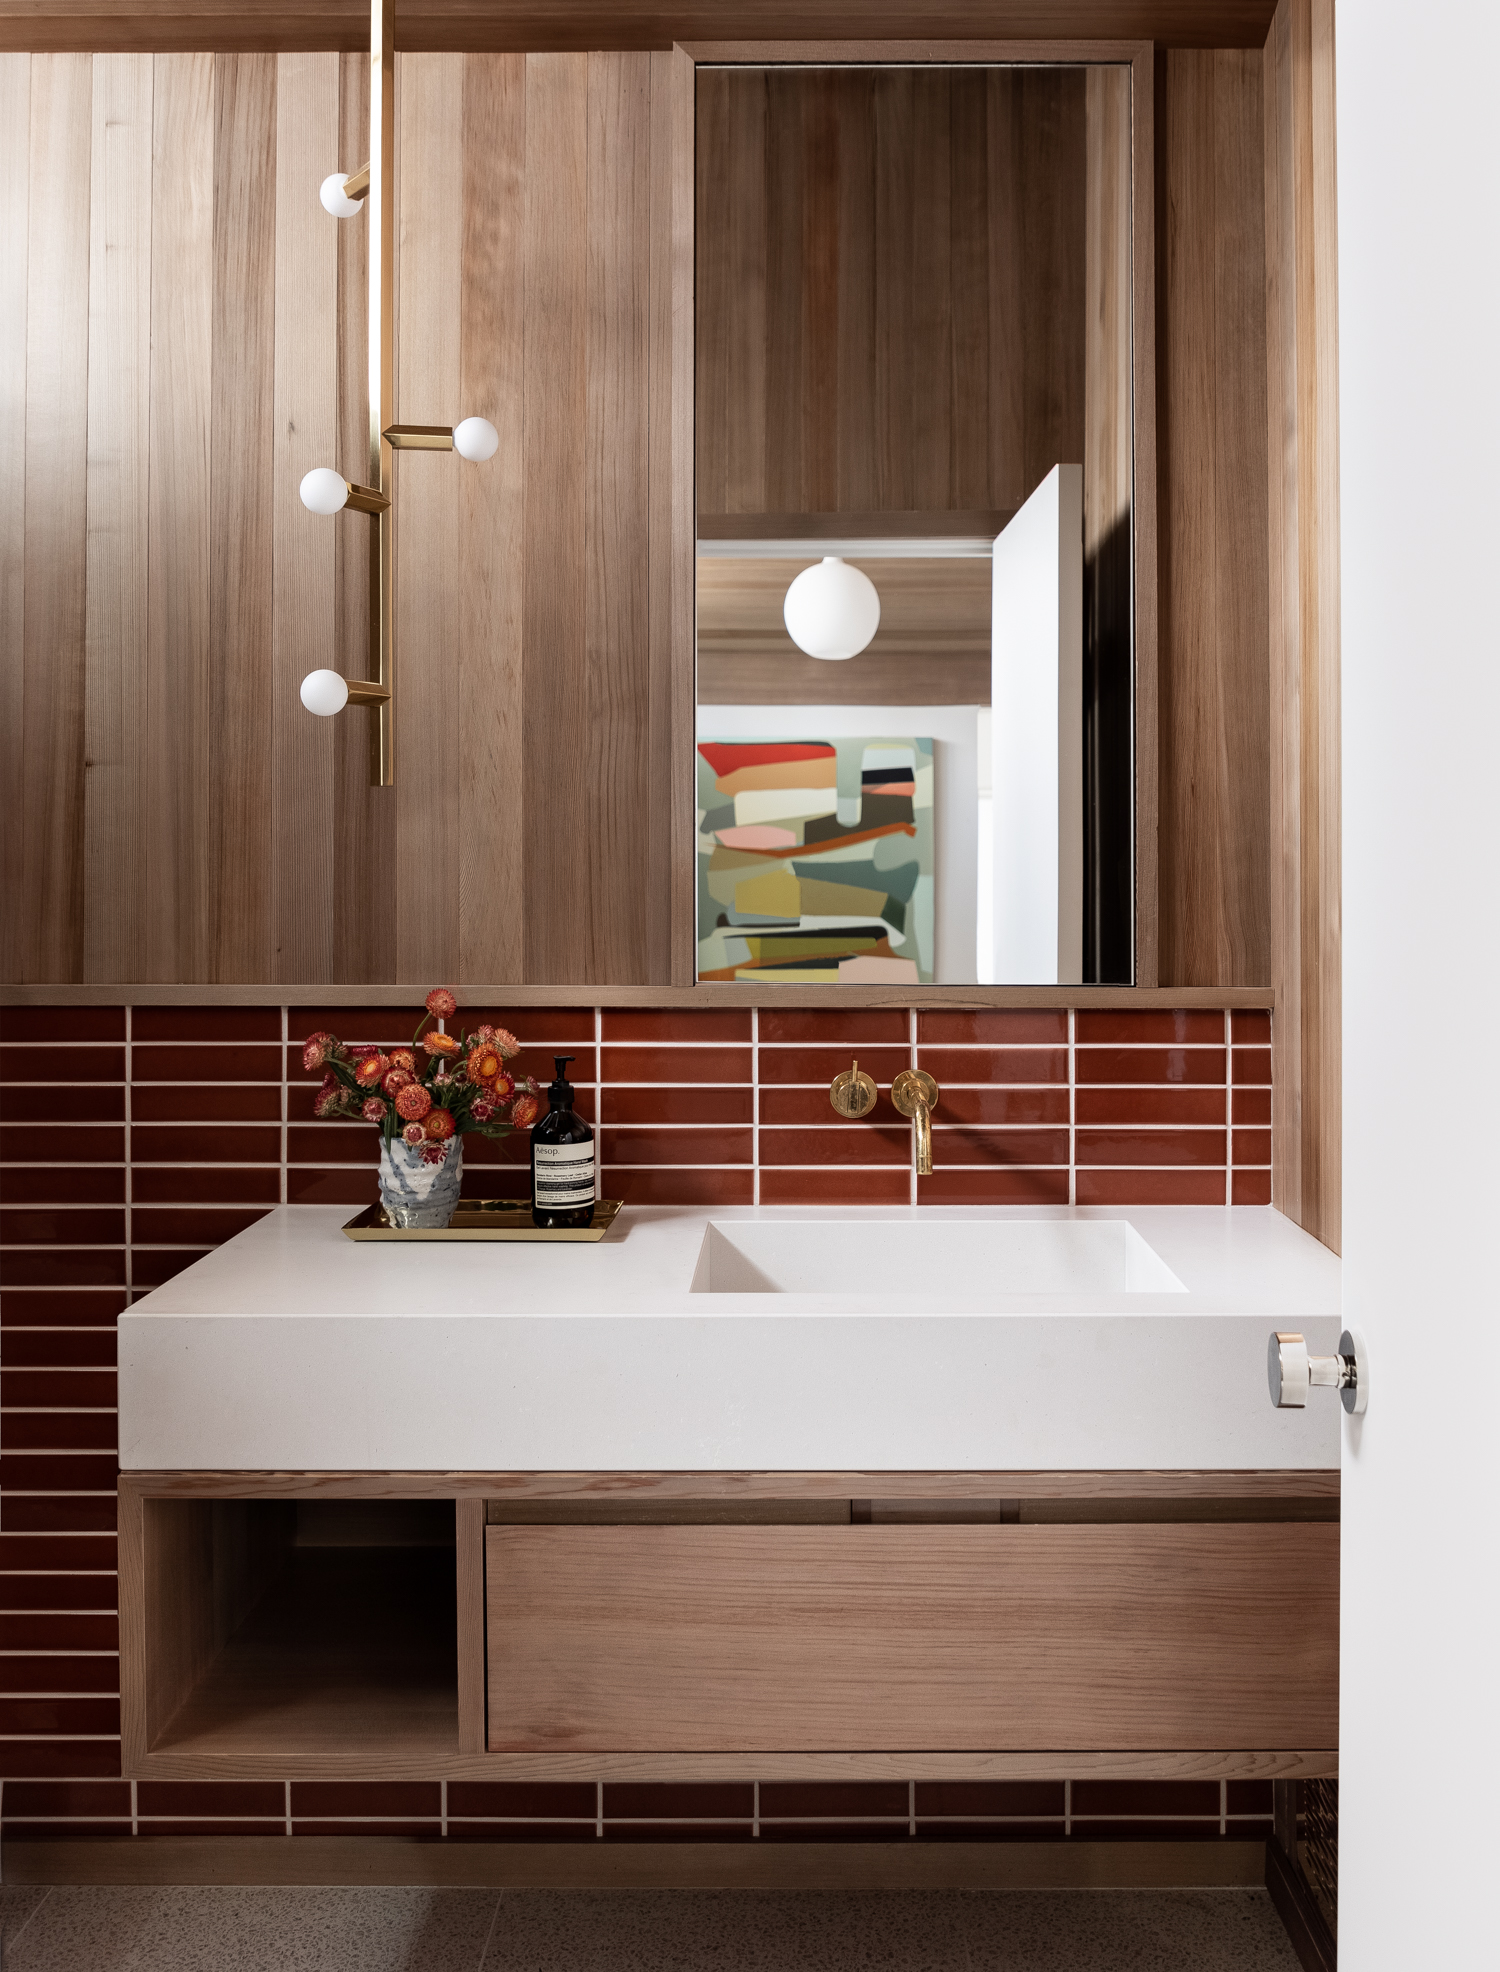 The powder room features a deep orange tile, brass finishes, and cedar cladding.